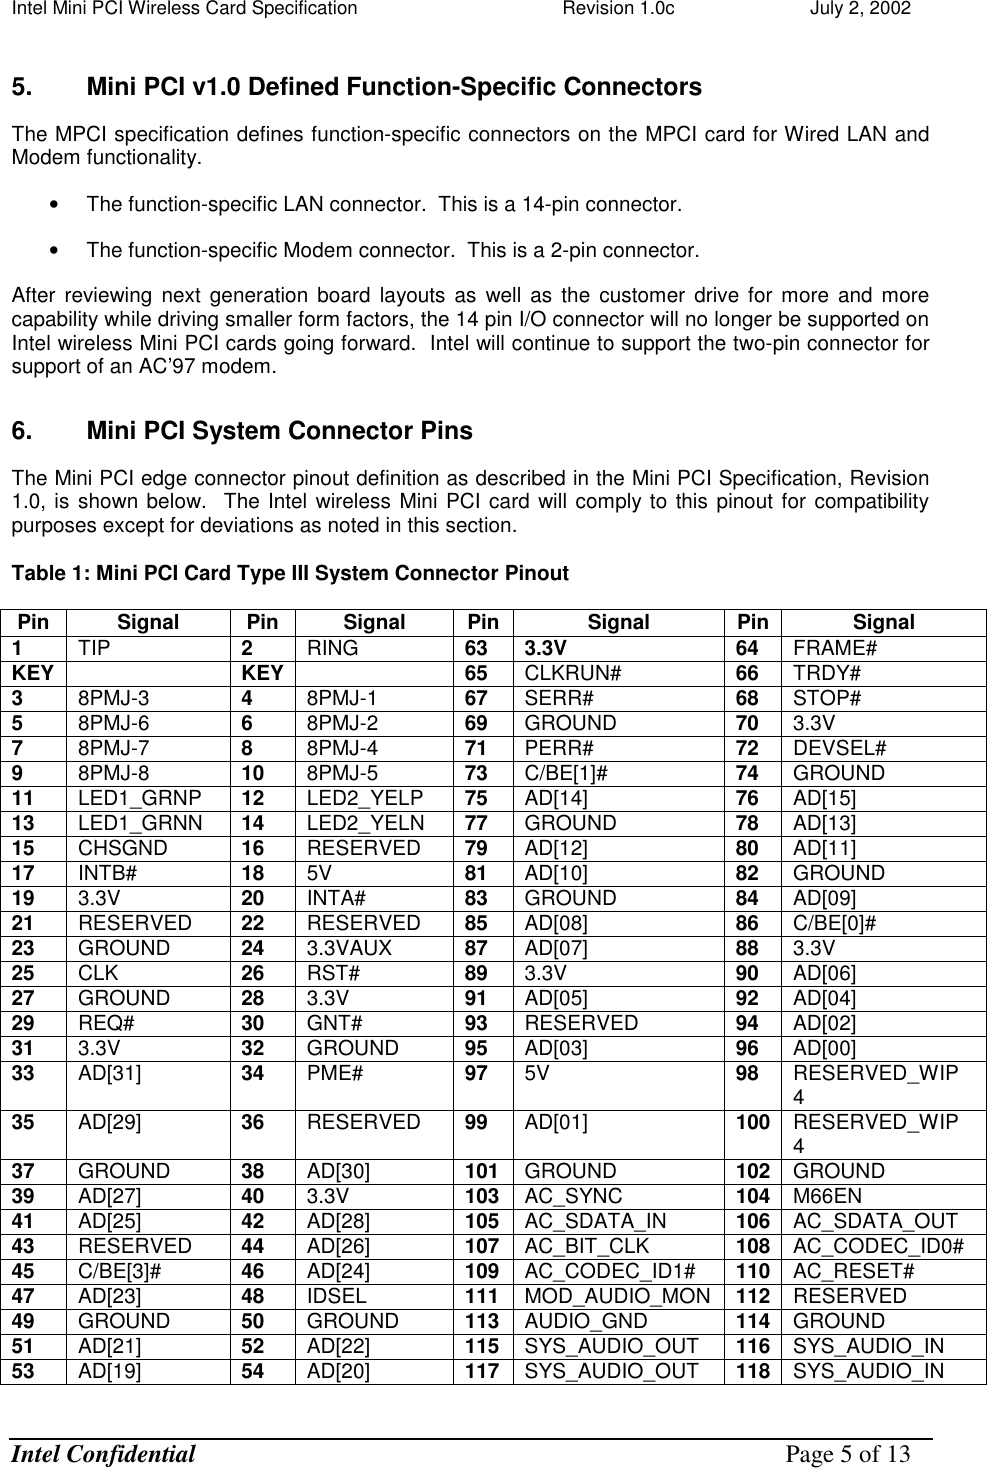 Intel Mini PCI Wireless Card Specification    Revision 1.0c                          July 2, 2002  Intel Confidential    Page 5 of 13  5.  Mini PCI v1.0 Defined Function-Specific Connectors The MPCI specification defines function-specific connectors on the MPCI card for Wired LAN and Modem functionality.   •  The function-specific LAN connector.  This is a 14-pin connector.   •  The function-specific Modem connector.  This is a 2-pin connector. After reviewing next generation board layouts as well as the customer drive for more and more capability while driving smaller form factors, the 14 pin I/O connector will no longer be supported on Intel wireless Mini PCI cards going forward.  Intel will continue to support the two-pin connector for support of an AC’97 modem. 6.  Mini PCI System Connector Pins The Mini PCI edge connector pinout definition as described in the Mini PCI Specification, Revision 1.0, is shown below.  The Intel wireless Mini PCI card will comply to this pinout for compatibility purposes except for deviations as noted in this section.  Table 1: Mini PCI Card Type III System Connector Pinout  Pin Signal Pin Signal Pin  Signal  Pin  Signal 1  TIP   2  RING 63 3.3V  64 FRAME# KEY   KEY   65  CLKRUN# 66  TRDY# 3  8PMJ-3 4  8PMJ-1 67  SERR# 68  STOP# 5  8PMJ-6 6  8PMJ-2  69  GROUND 70  3.3V 7  8PMJ-7 8  8PMJ-4  71  PERR# 72  DEVSEL# 9  8PMJ-8 10  8PMJ-5  73  C/BE[1]# 74  GROUND 11  LED1_GRNP  12  LED2_YELP 75  AD[14] 76  AD[15] 13  LED1_GRNN 14  LED2_YELN 77  GROUND 78  AD[13] 15  CHSGND 16  RESERVED 79  AD[12] 80  AD[11] 17  INTB# 18  5V 81  AD[10] 82  GROUND 19  3.3V 20  INTA# 83  GROUND 84  AD[09] 21  RESERVED 22  RESERVED 85  AD[08] 86  C/BE[0]# 23  GROUND 24  3.3VAUX 87  AD[07] 88  3.3V 25  CLK 26  RST# 89  3.3V 90  AD[06] 27  GROUND 28  3.3V 91  AD[05] 92  AD[04] 29  REQ# 30  GNT# 93  RESERVED 94  AD[02] 31  3.3V 32  GROUND 95  AD[03] 96  AD[00] 33  AD[31] 34  PME# 97  5V 98  RESERVED_WIP 4 35  AD[29] 36  RESERVED 99  AD[01] 100  RESERVED_WIP 4 37  GROUND  38  AD[30]  101  GROUND  102  GROUND 39  AD[27]  40  3.3V  103  AC_SYNC  104  M66EN 41  AD[25]  42  AD[28]  105  AC_SDATA_IN  106  AC_SDATA_OUT 43  RESERVED  44  AD[26]  107  AC_BIT_CLK  108  AC_CODEC_ID0# 45  C/BE[3]#  46  AD[24]  109  AC_CODEC_ID1#  110  AC_RESET# 47  AD[23]  48  IDSEL  111  MOD_AUDIO_MON    112  RESERVED 49  GROUND  50  GROUND  113  AUDIO_GND  114  GROUND 51  AD[21]  52  AD[22]  115  SYS_AUDIO_OUT  116  SYS_AUDIO_IN 53  AD[19]  54  AD[20]  117  SYS_AUDIO_OUT  118  SYS_AUDIO_IN 